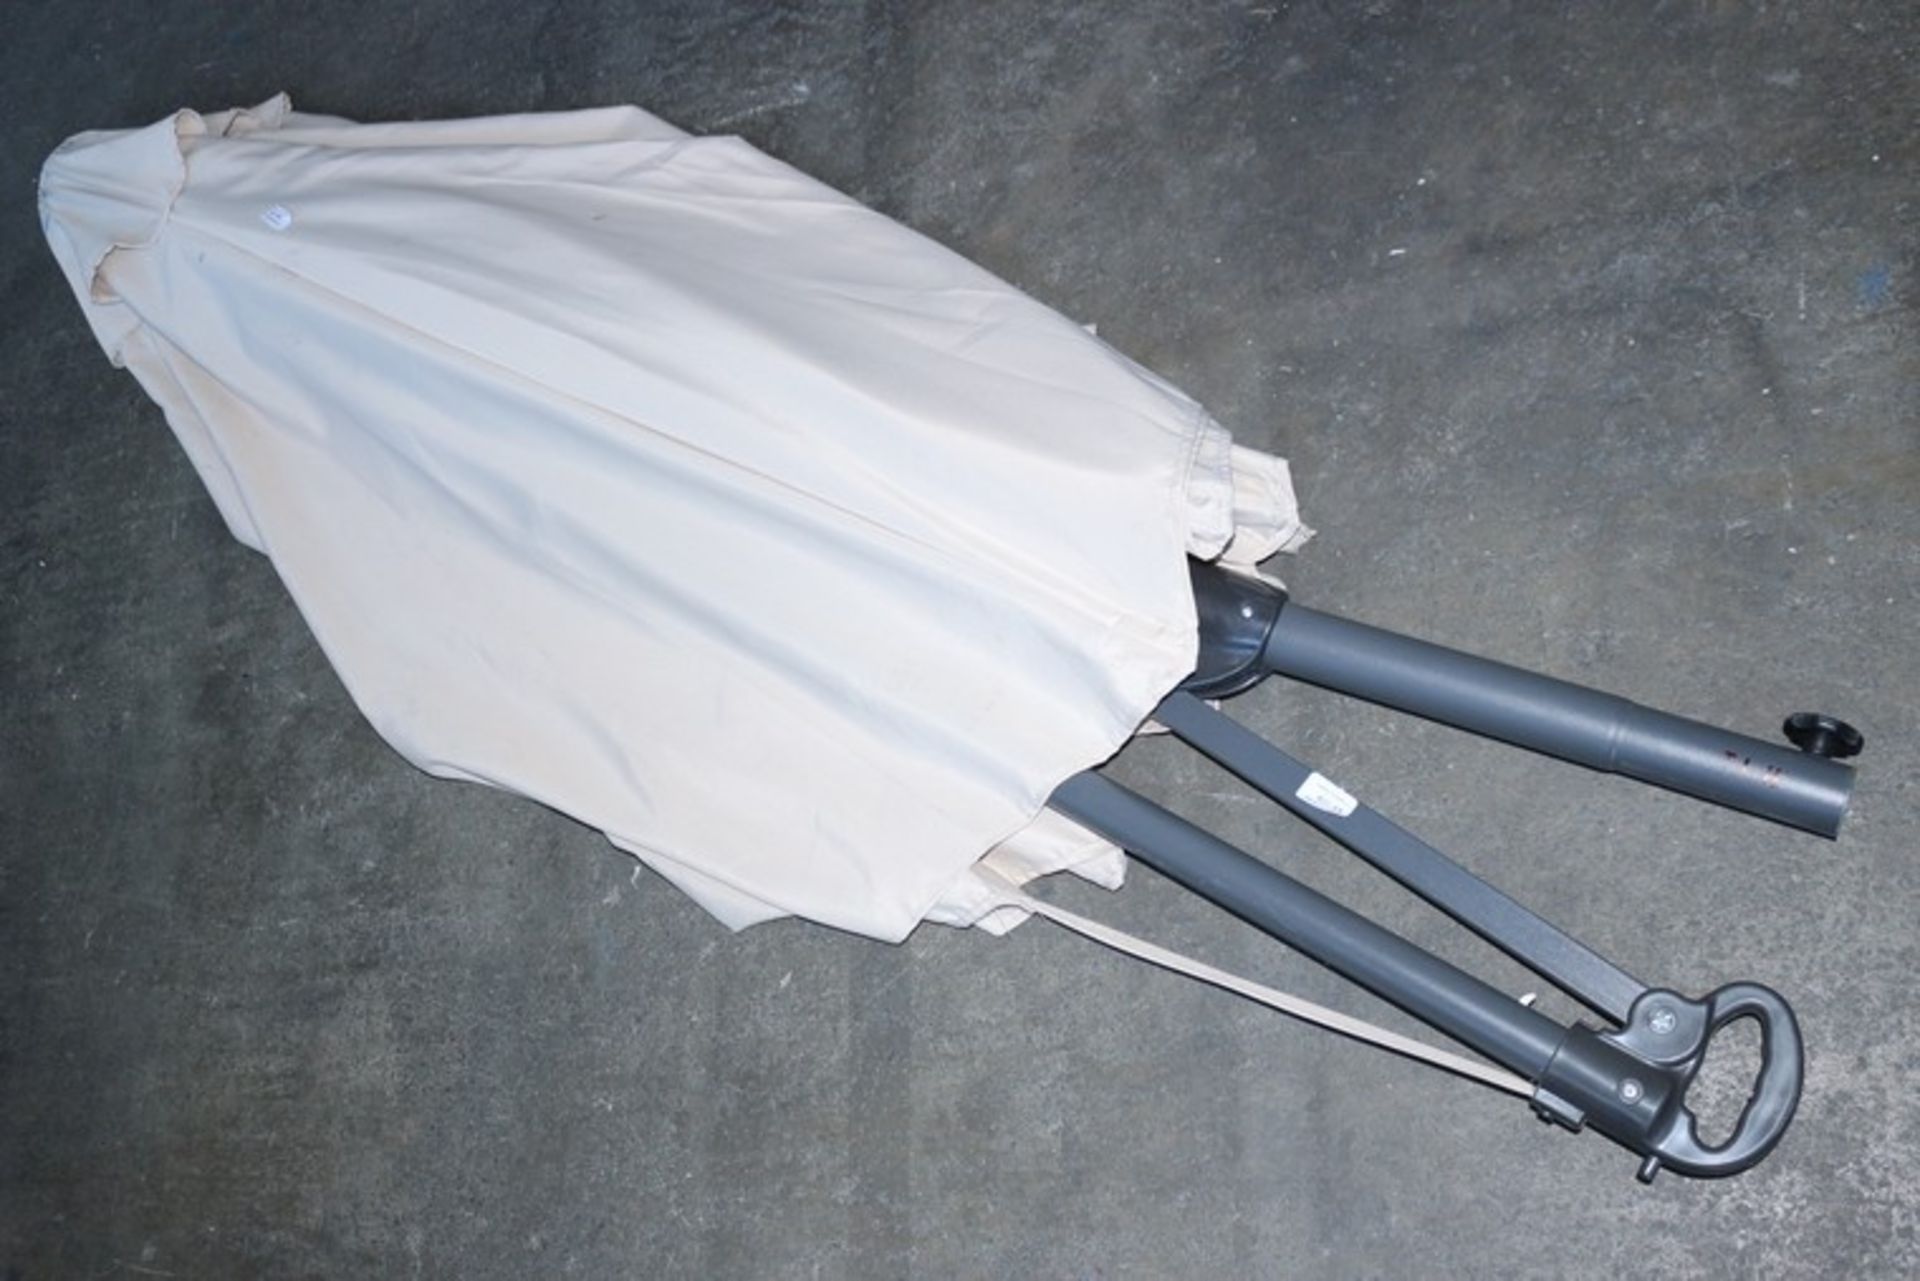 1 x JL PARASOL IN OYSTER *PLEASE NOTE THAT THE BID PRICE IS MULTIPLIED BY THE NUMBER OF ITEMS IN THE